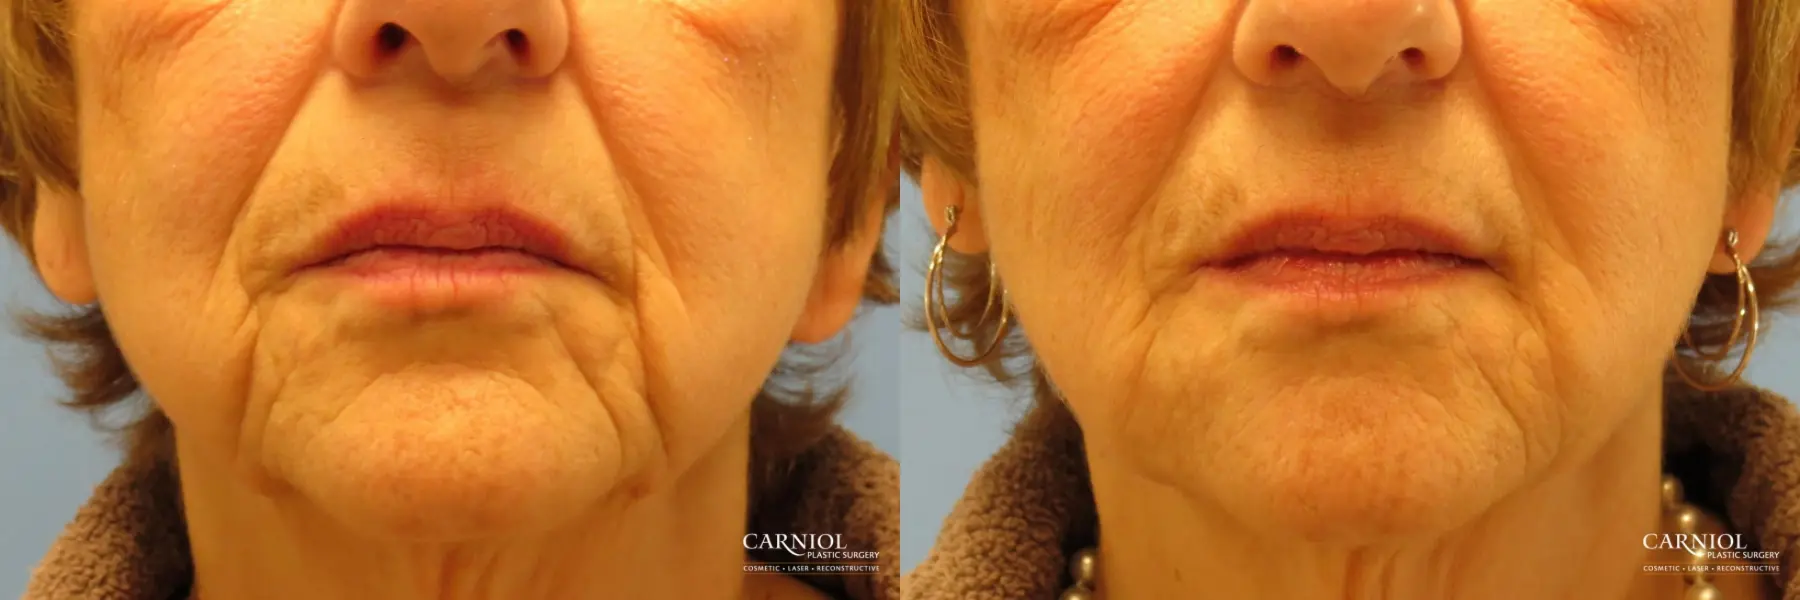 Non-Surgical Mini-Facelift: Patient 9 - Before and After  